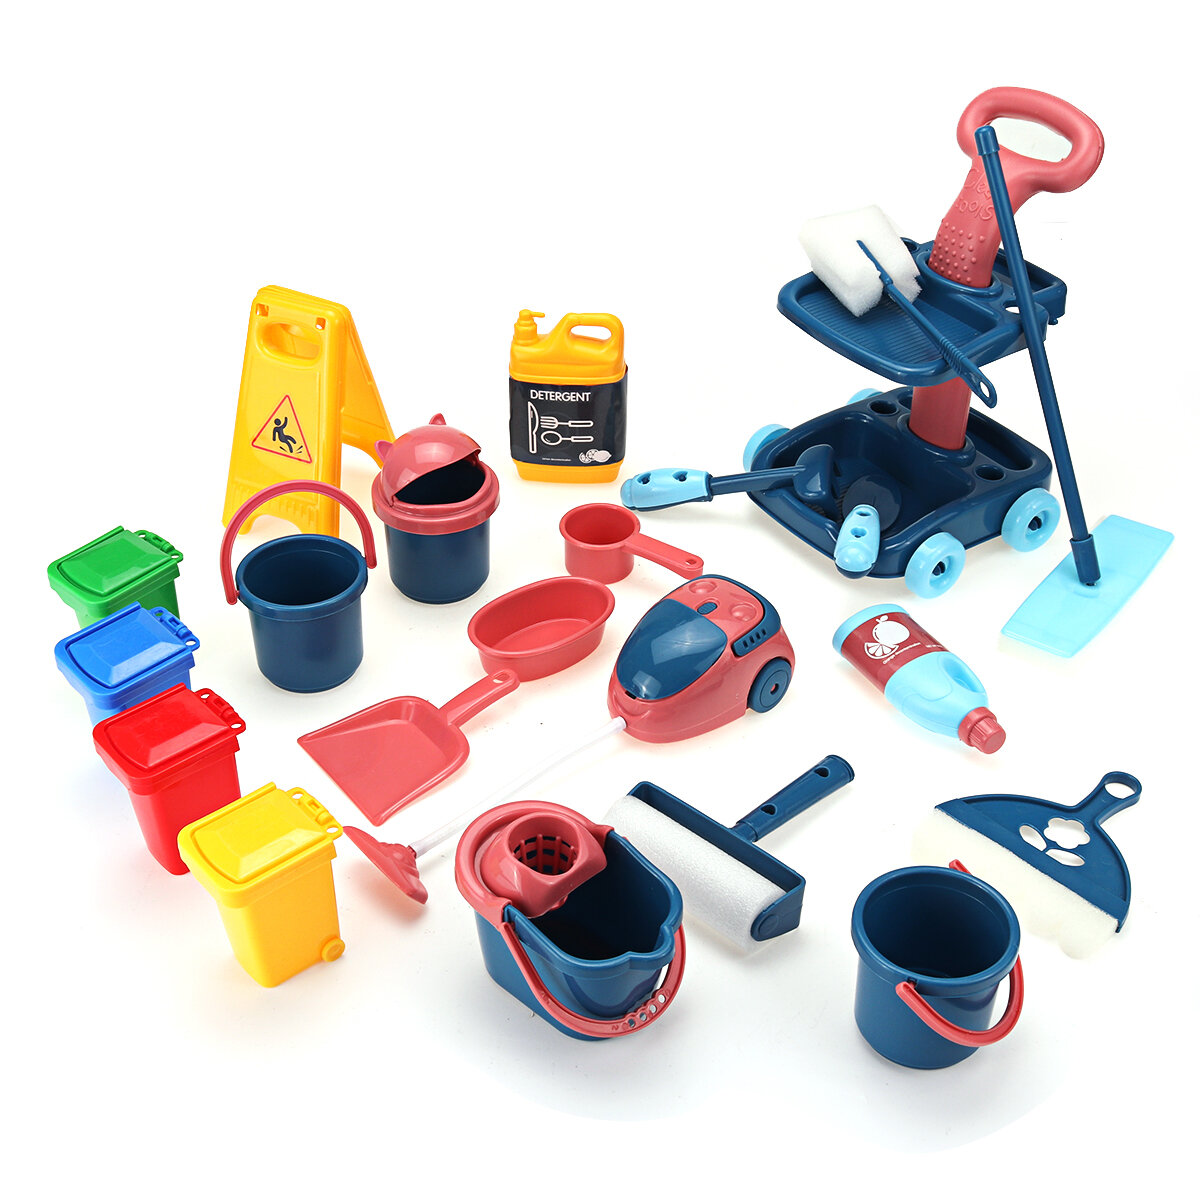 18 Pcs Kids Cleaning Tools Toy Set Simulation Kitchen Cleaning Educational Toys